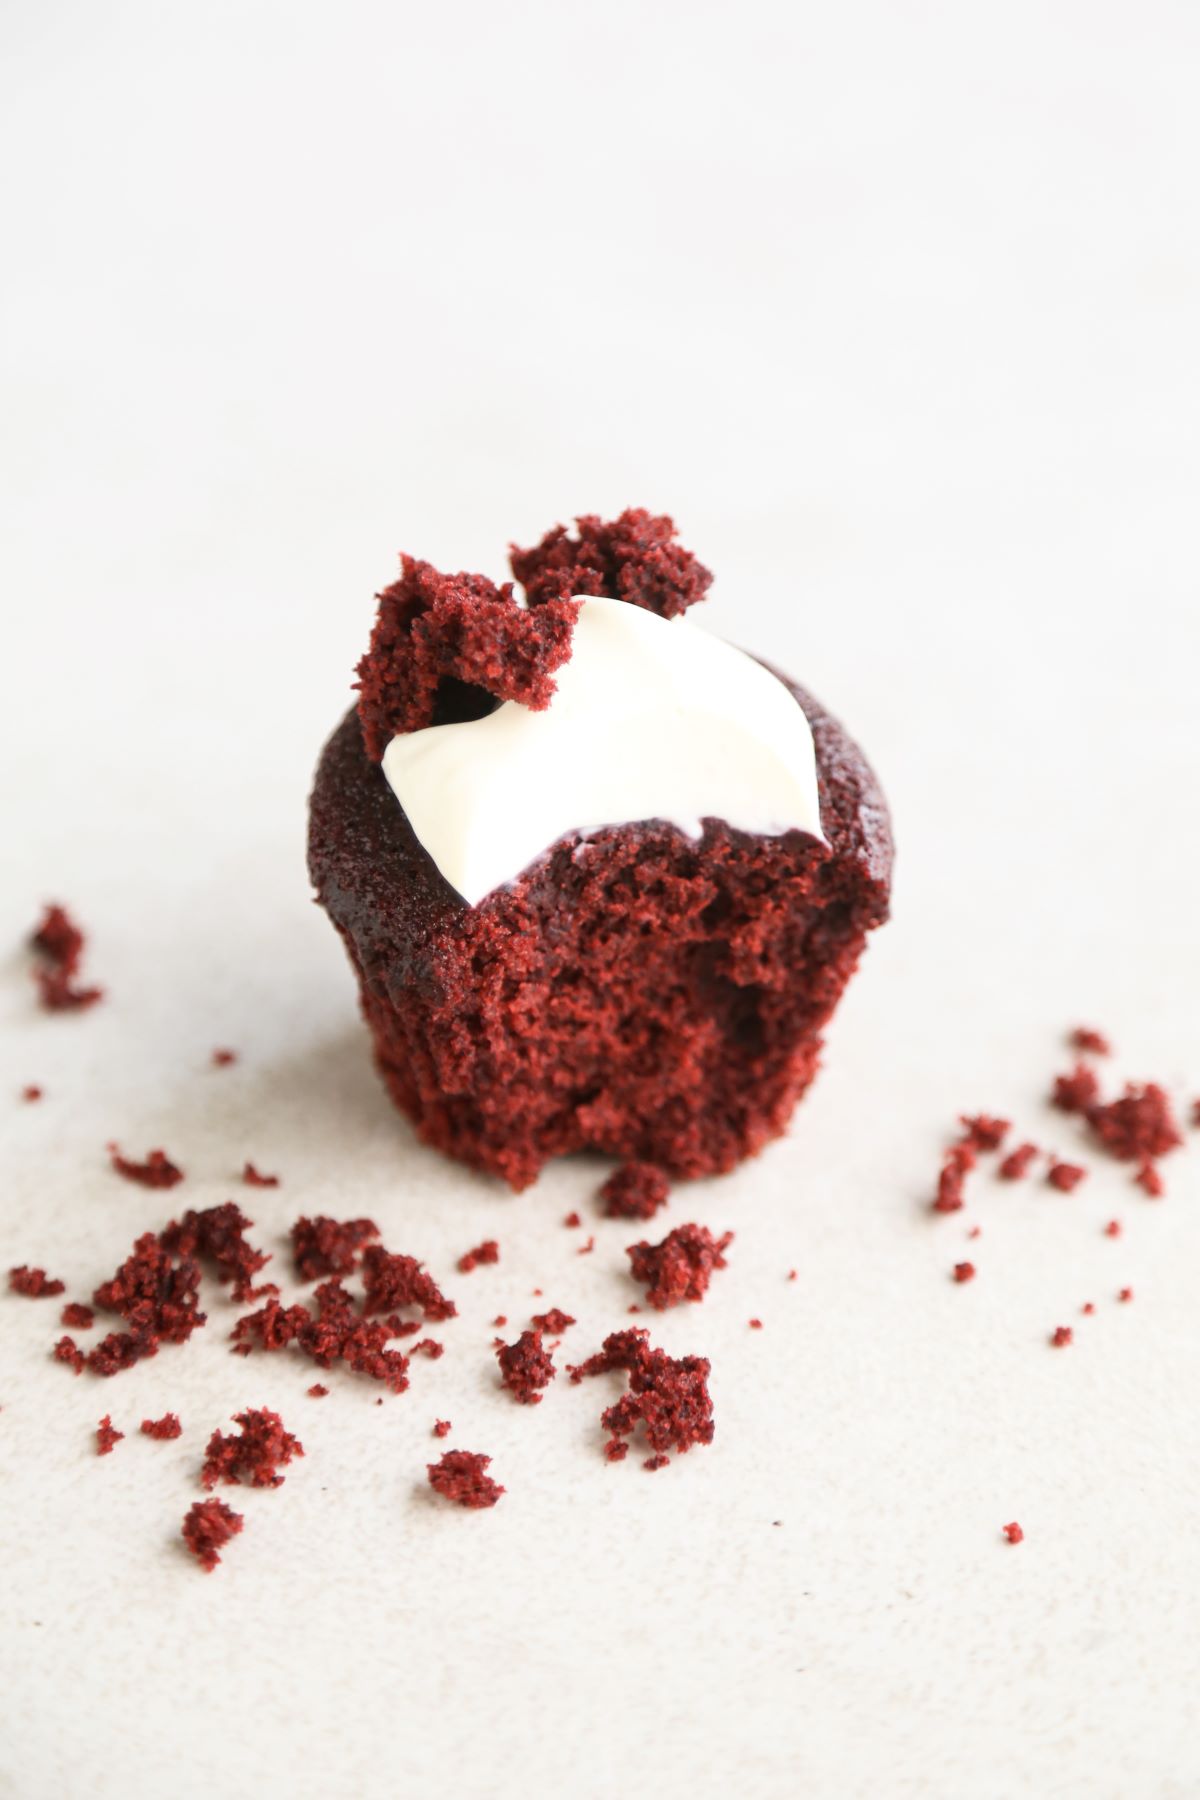 Red velvet muffin with cream cheese frosting without a piece on a white surface. Crumbs around.